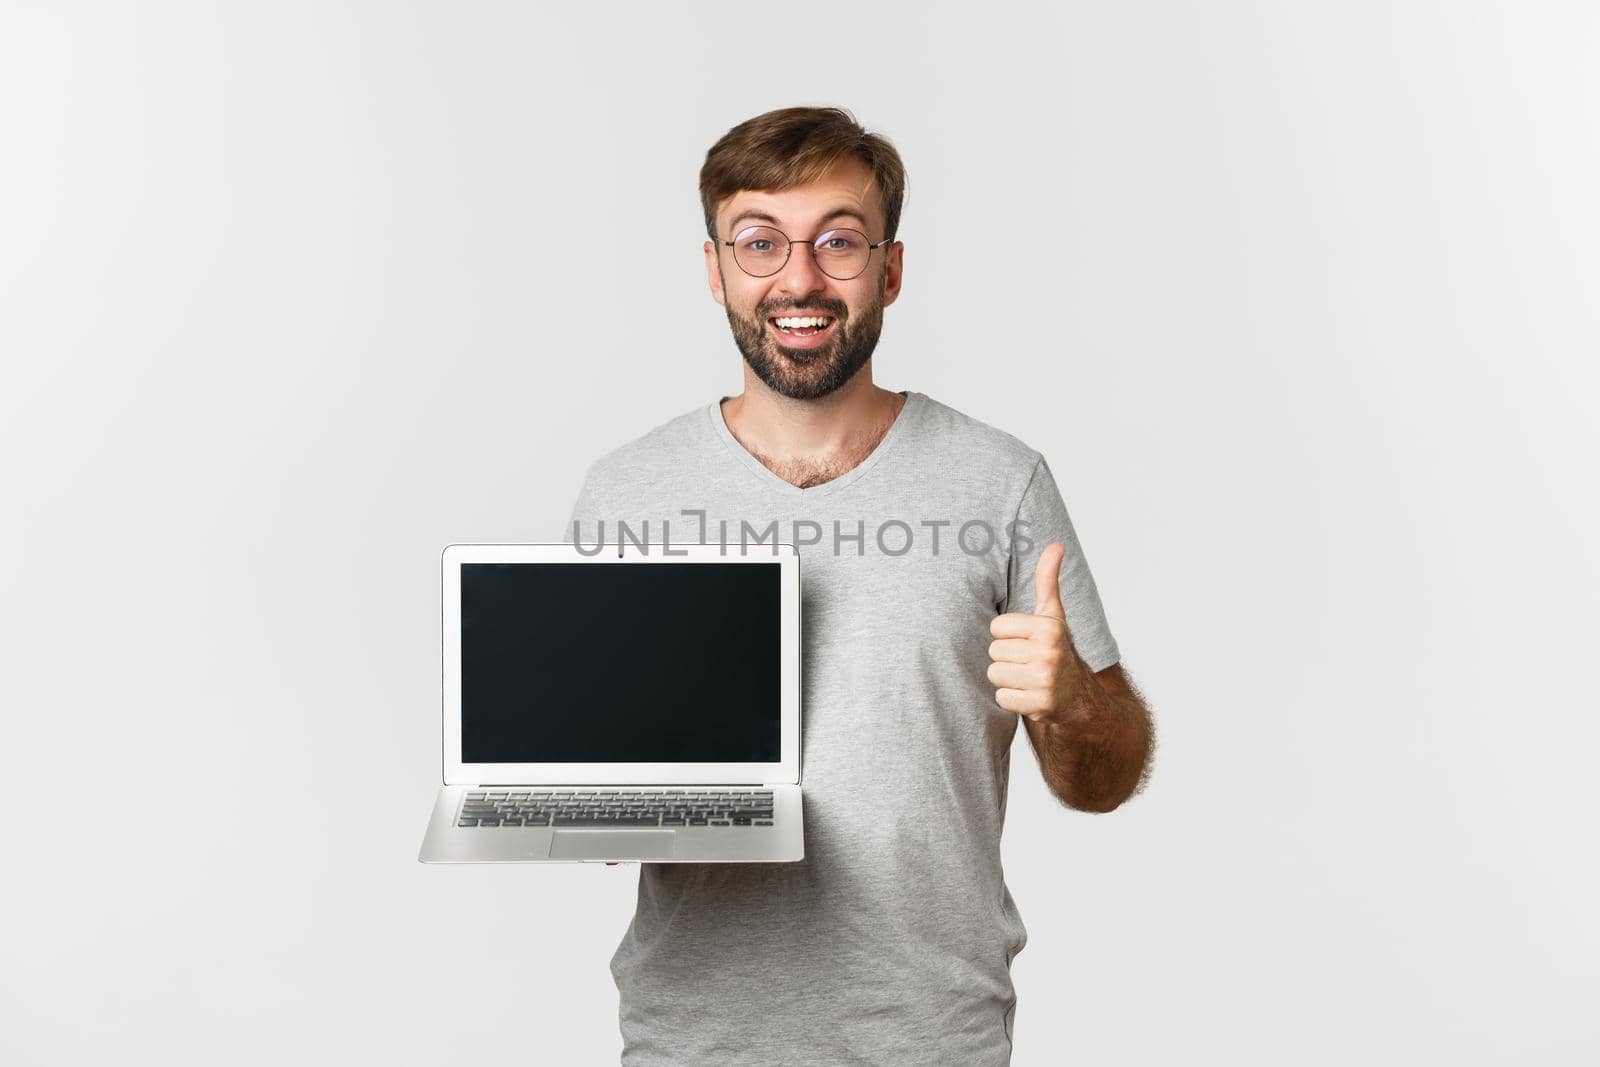 Cheerful man in gray t-shirt, showing laptop screen and smiling, making thumbs-up in approval, standing over white background.